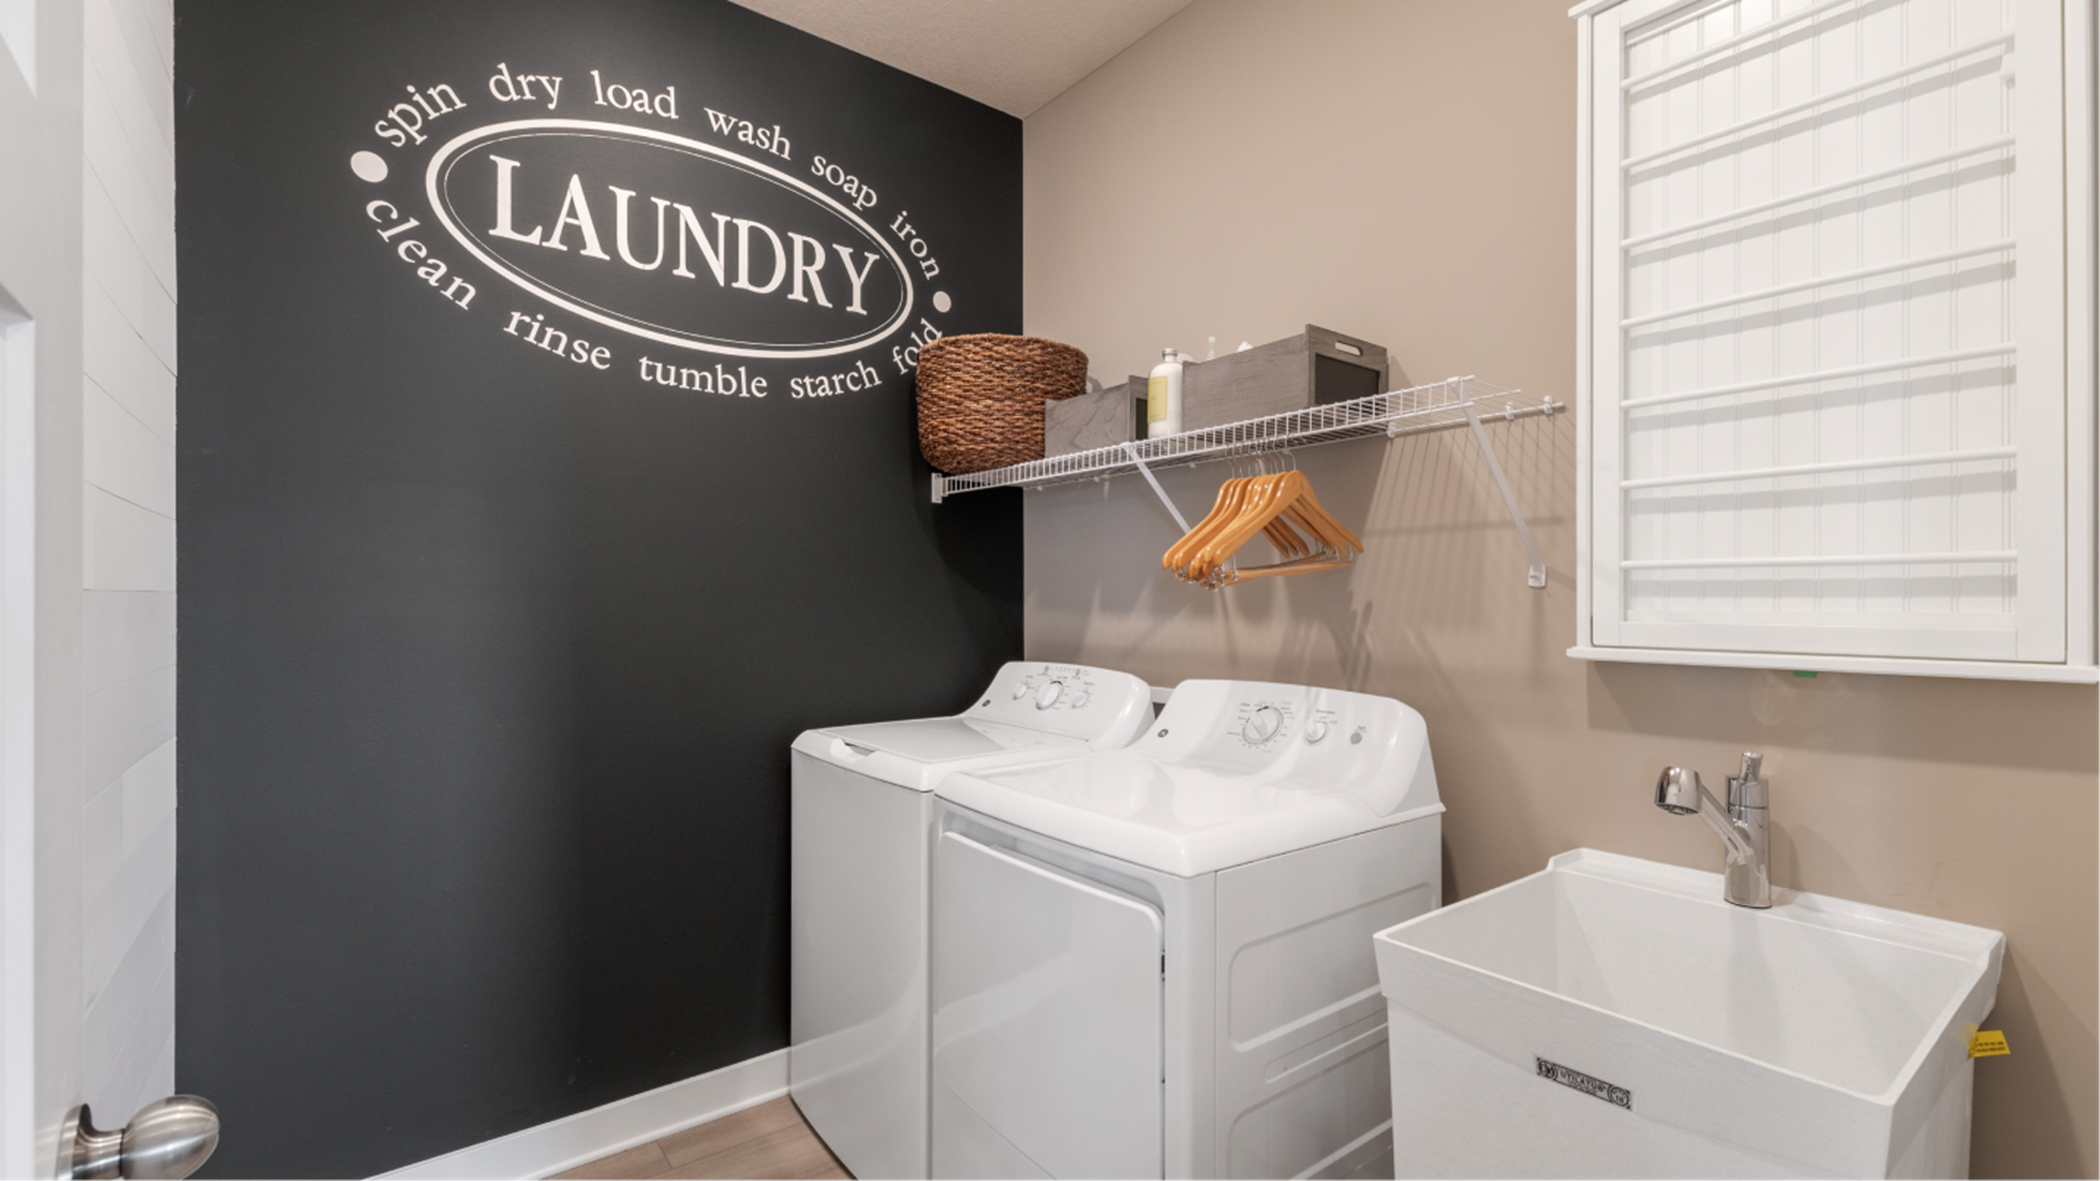 Clearwater laundry room